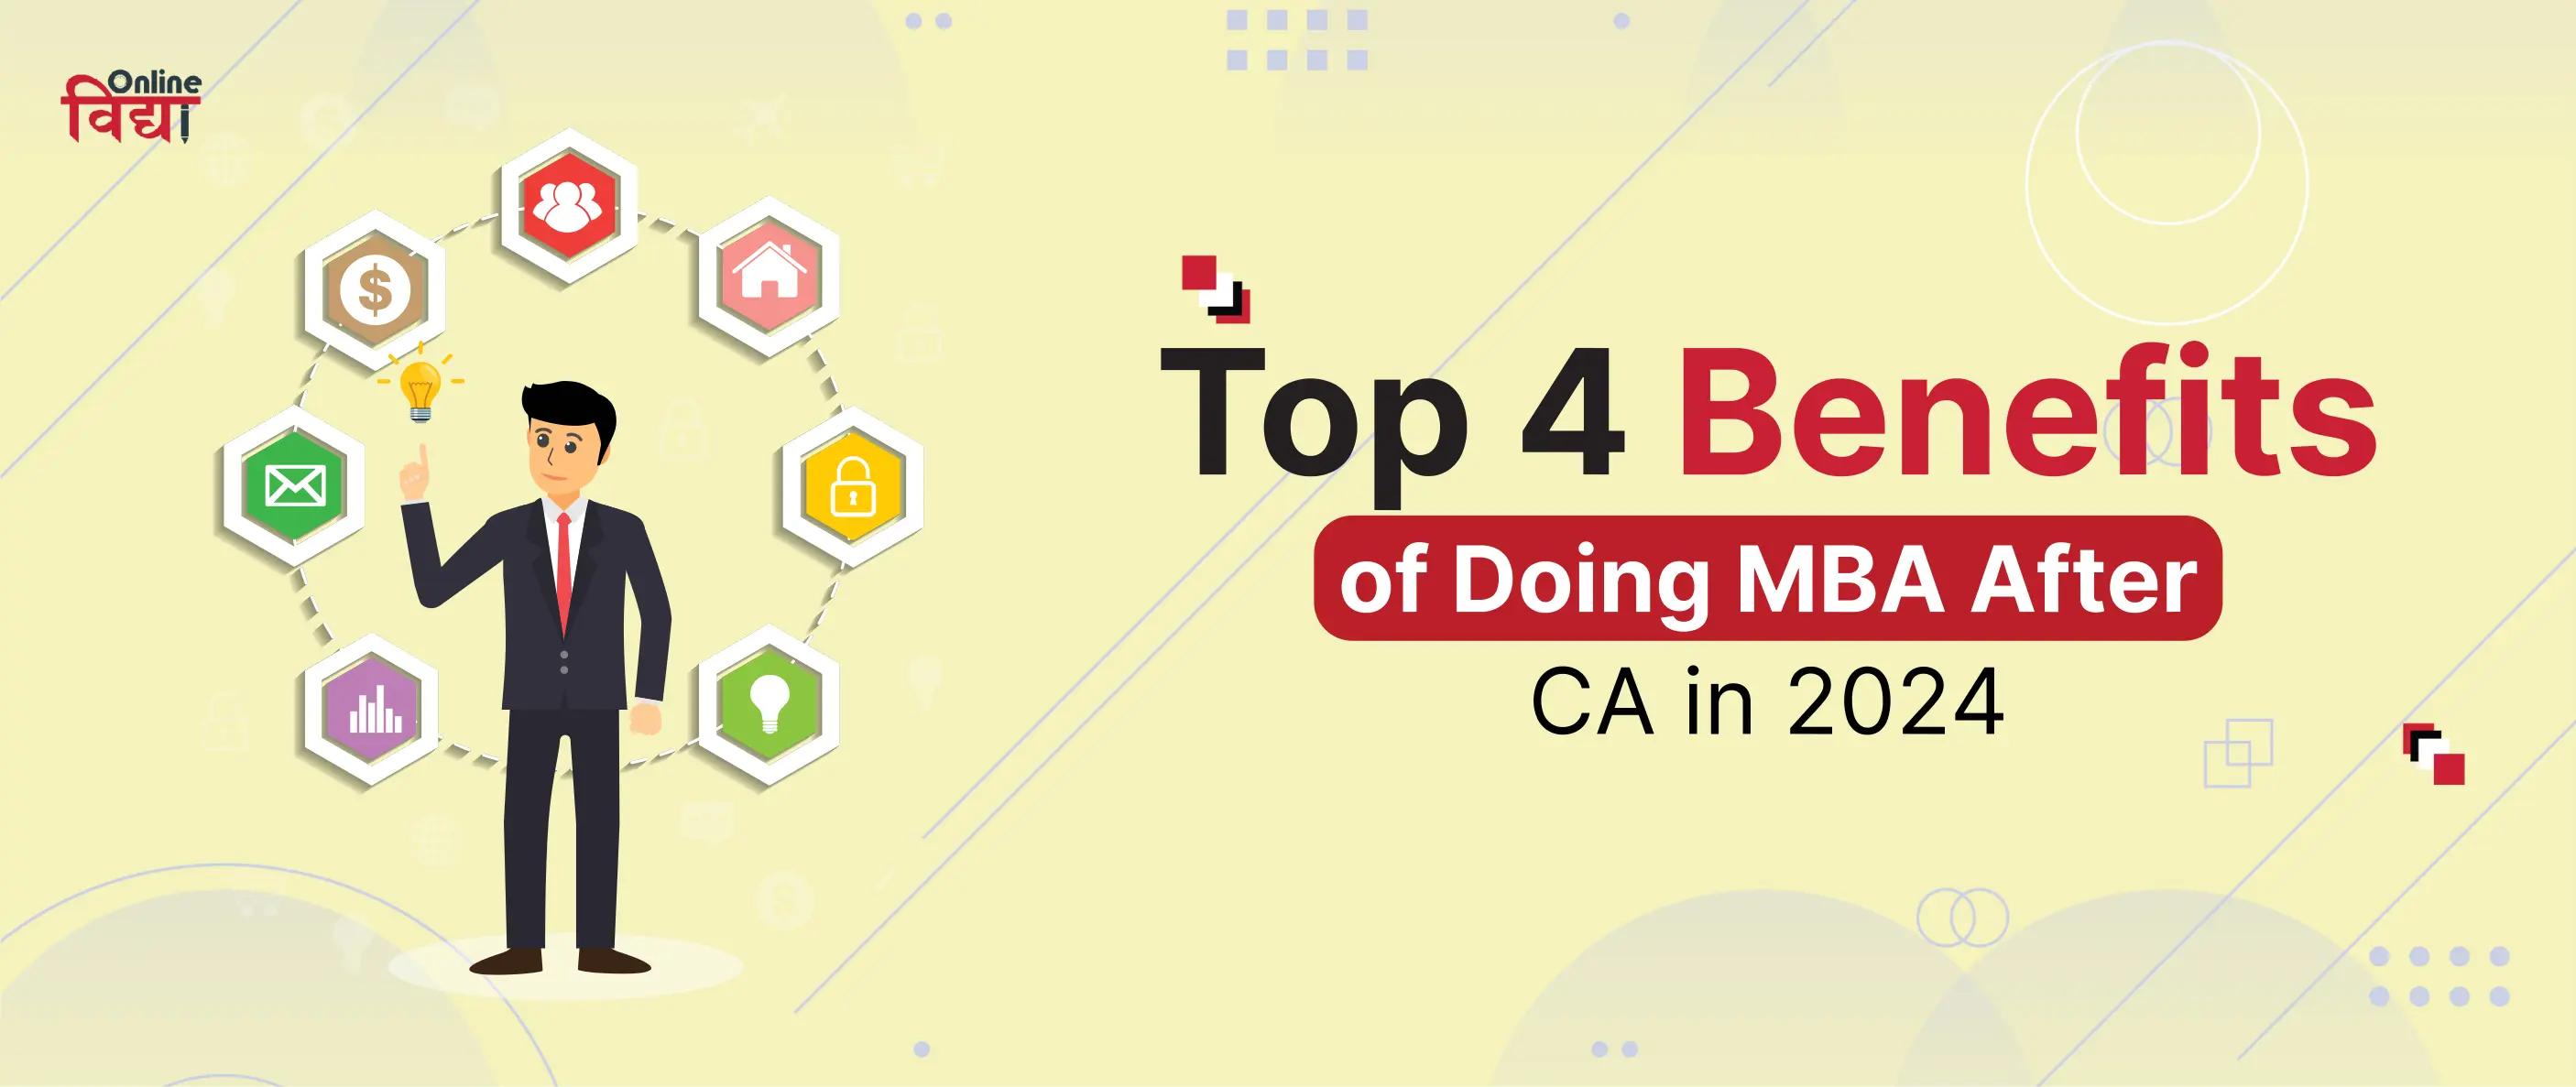 Top 4 Benefits of Doing MBA After CA in 2024